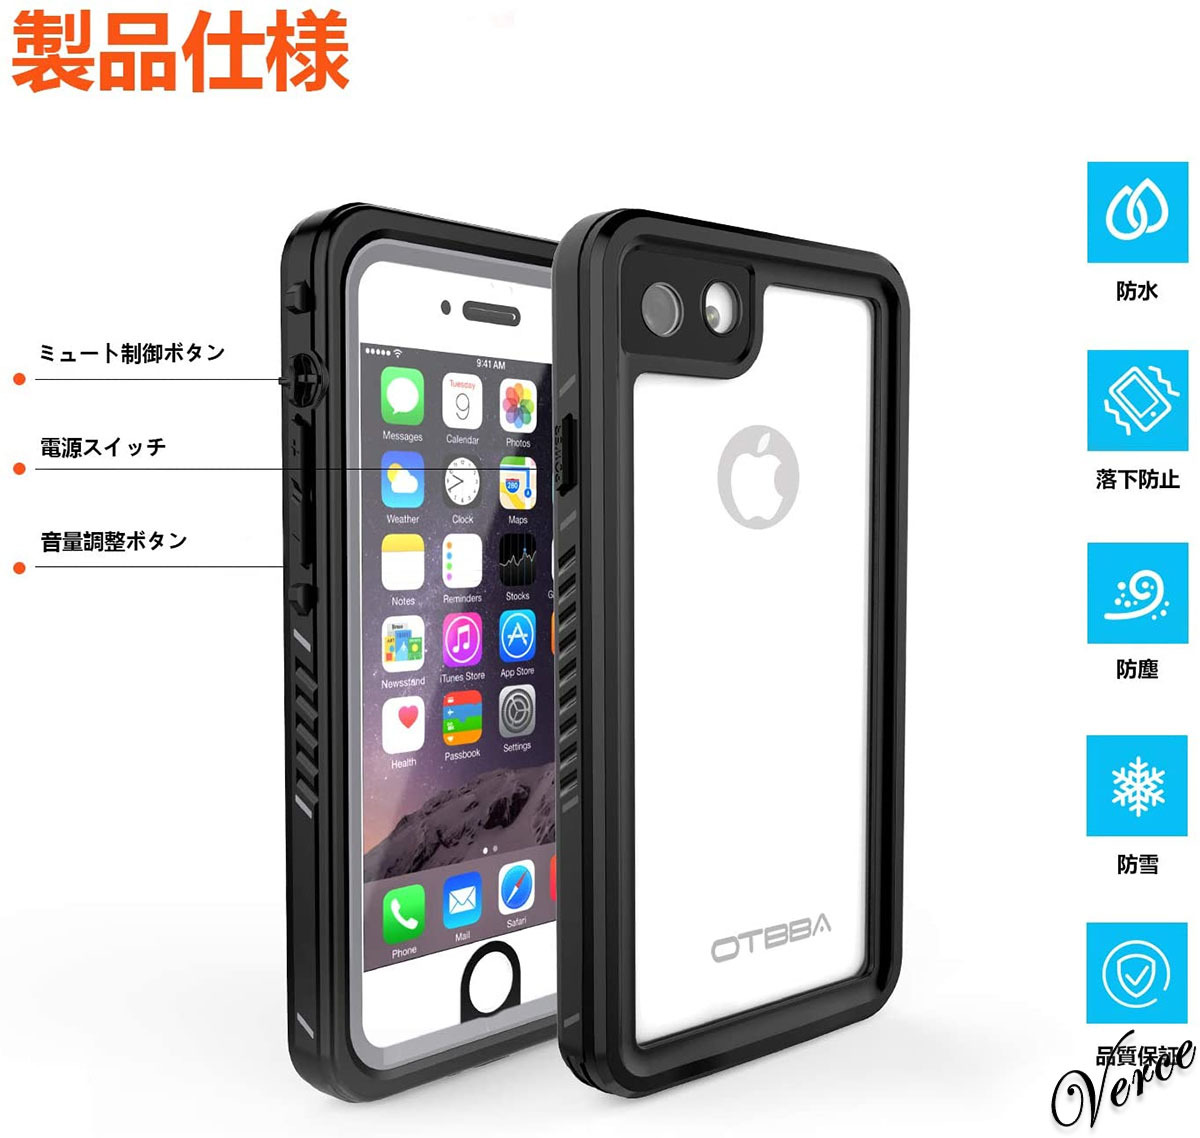  waterproof case bath . rain. day also use possibility iPhone 7 / 8 SE IP68 waterproof dustproof snow protection fingerprint authentication Impact-proof the US armed forces standard complete protection 360 times whole surface protection 